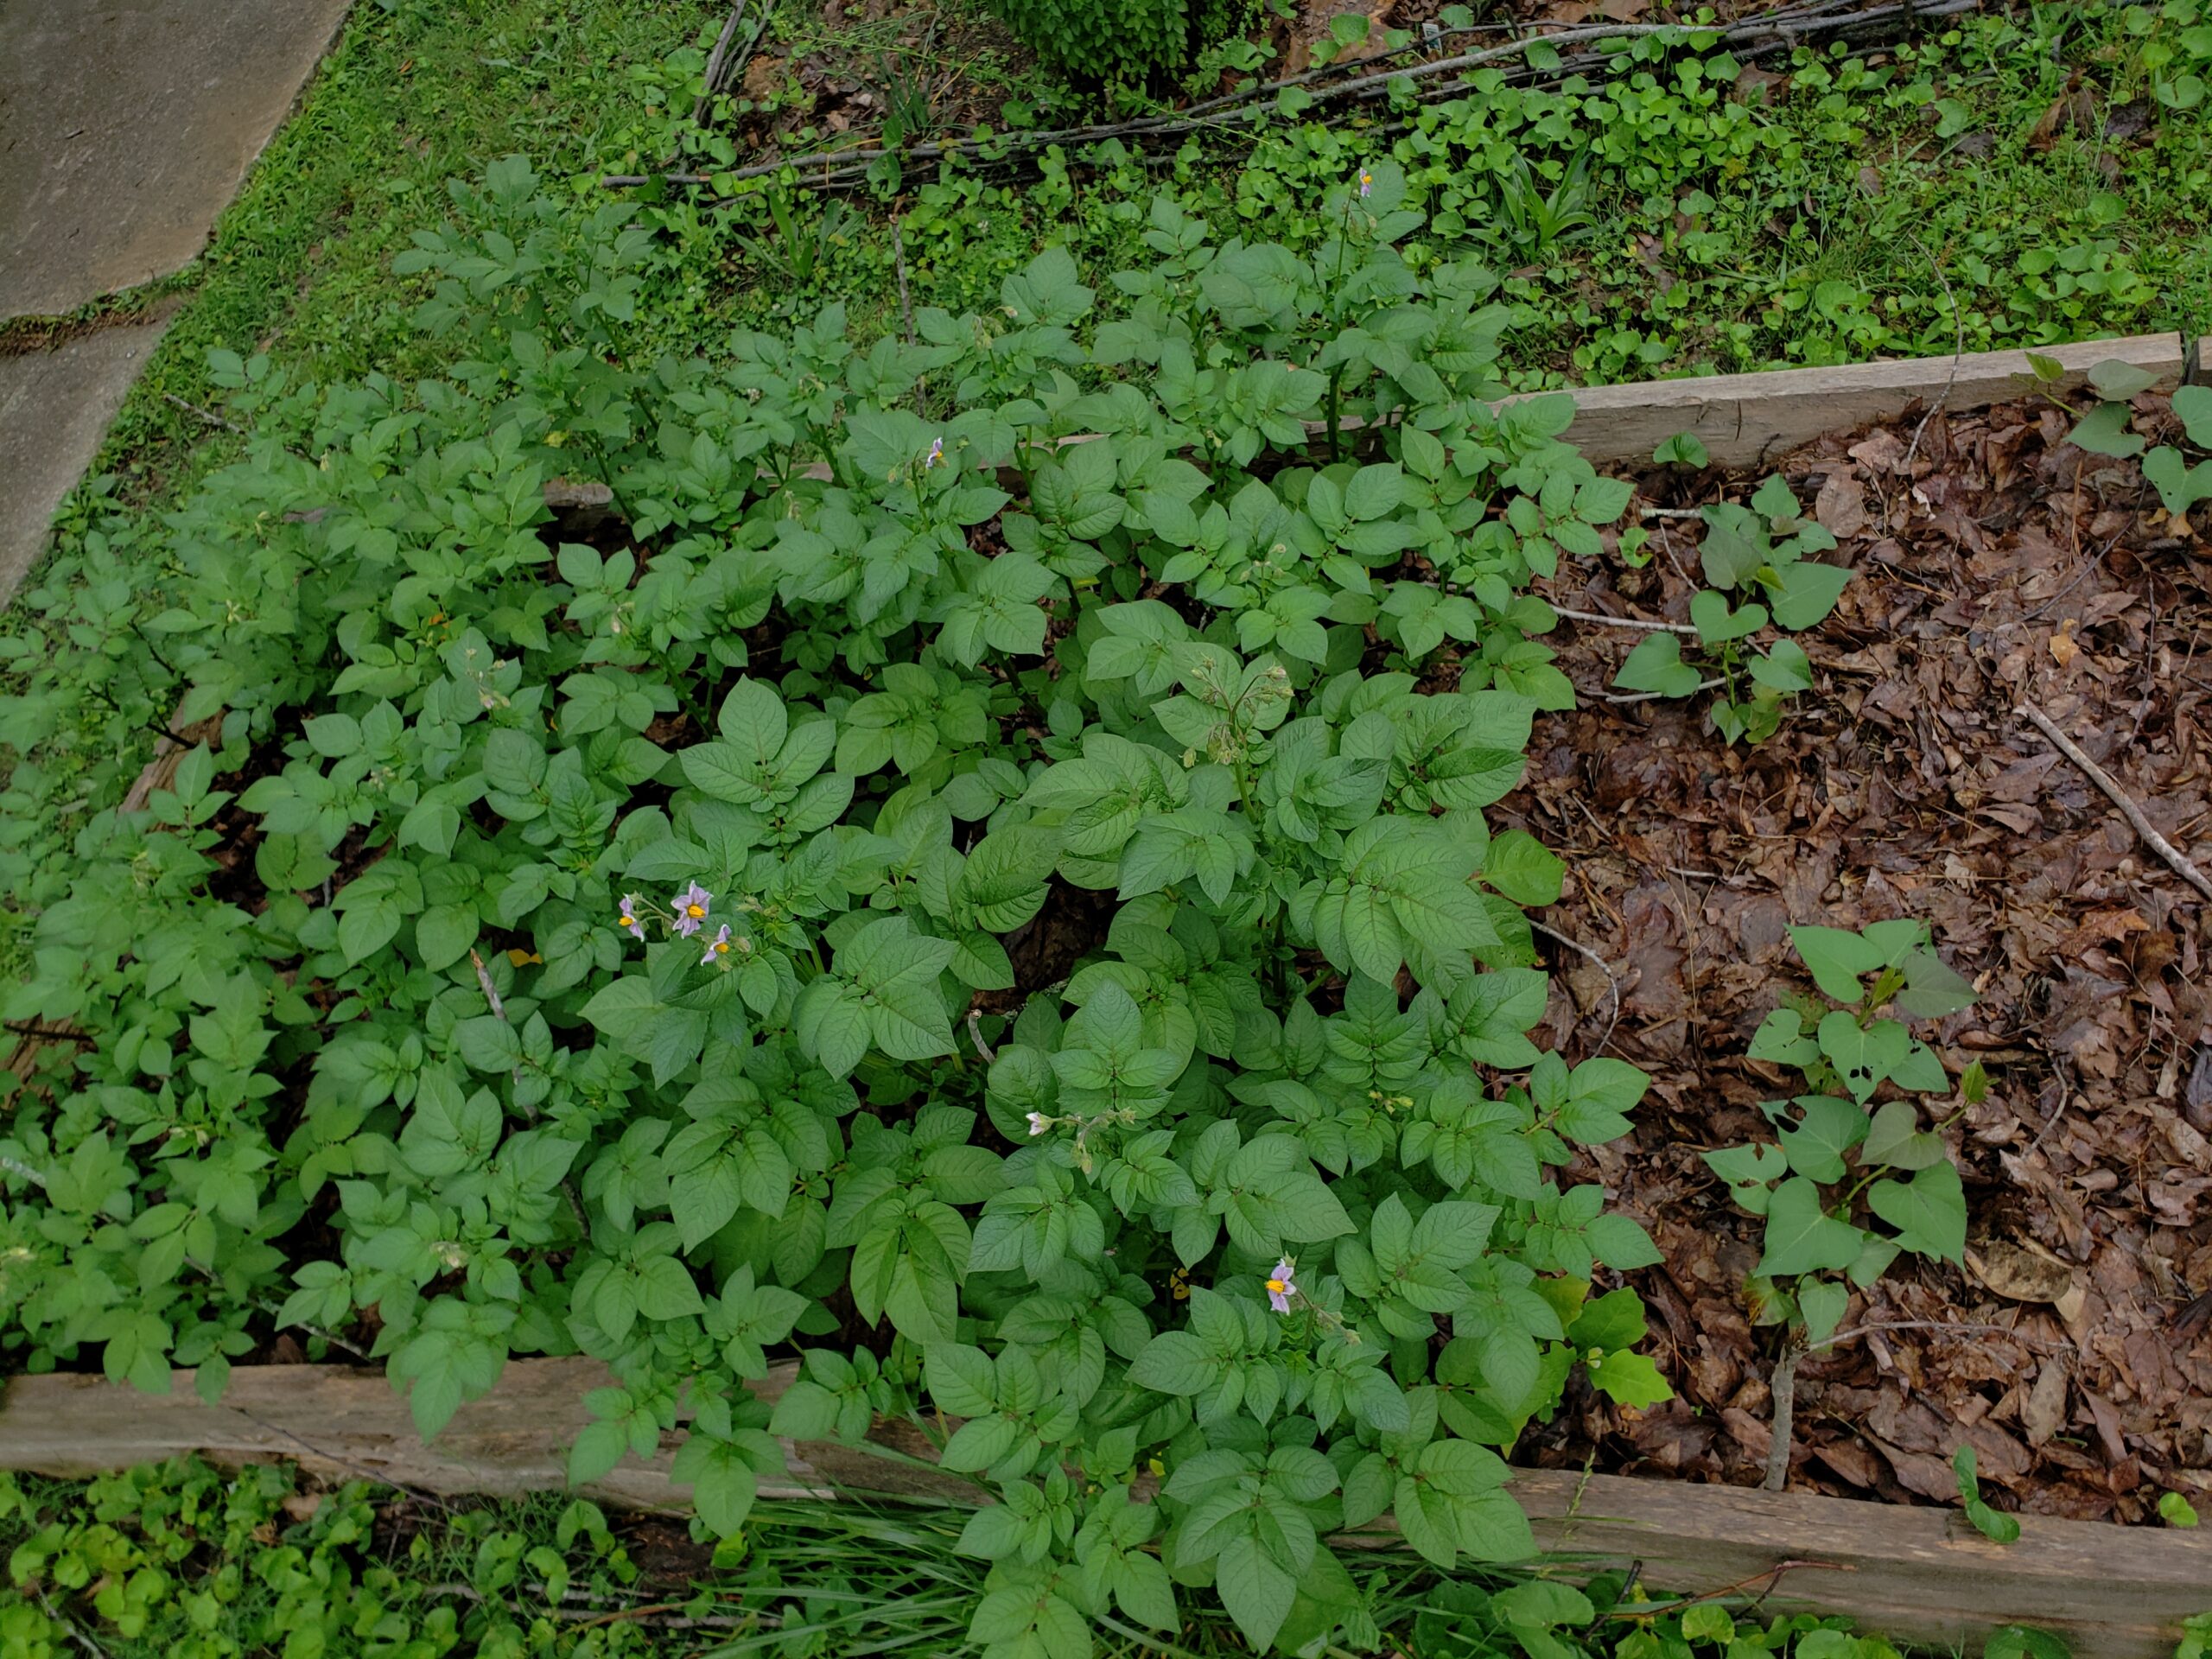 Growing Potatoes in a Raised Bed with Leaf Mulch: A Step-by-Step Guide